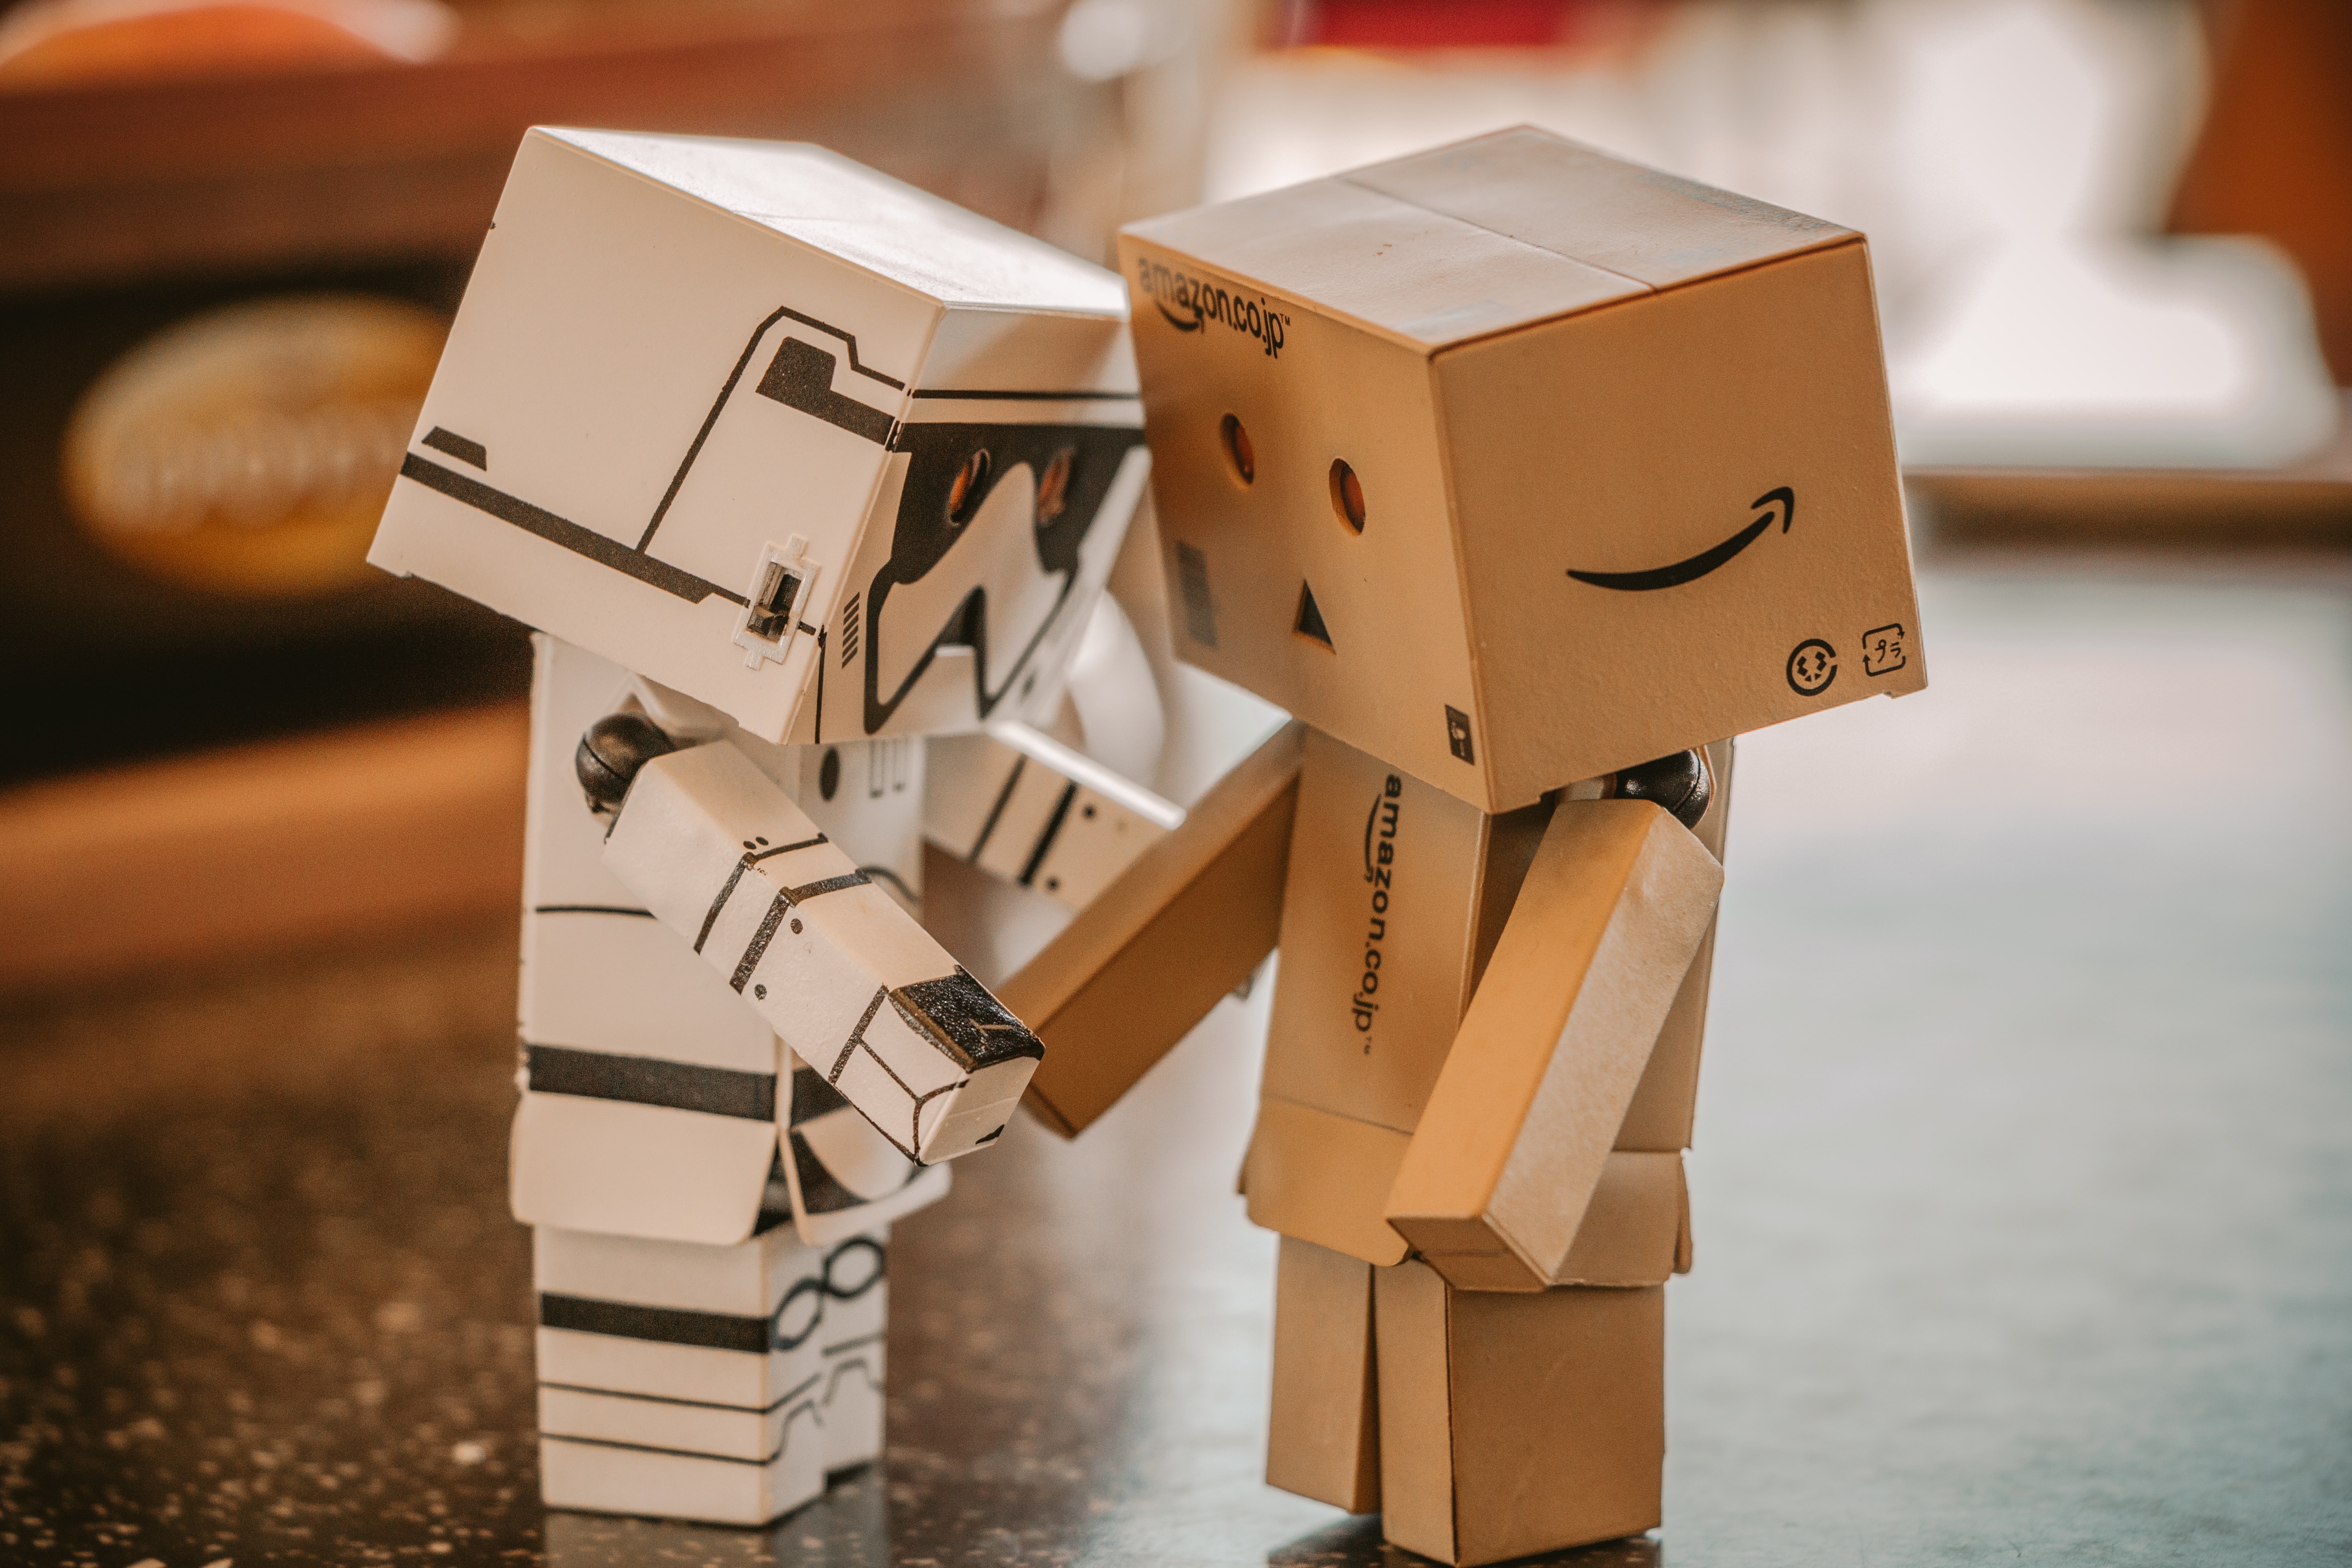 An Image of Bot box Stormtrooper and Amazon